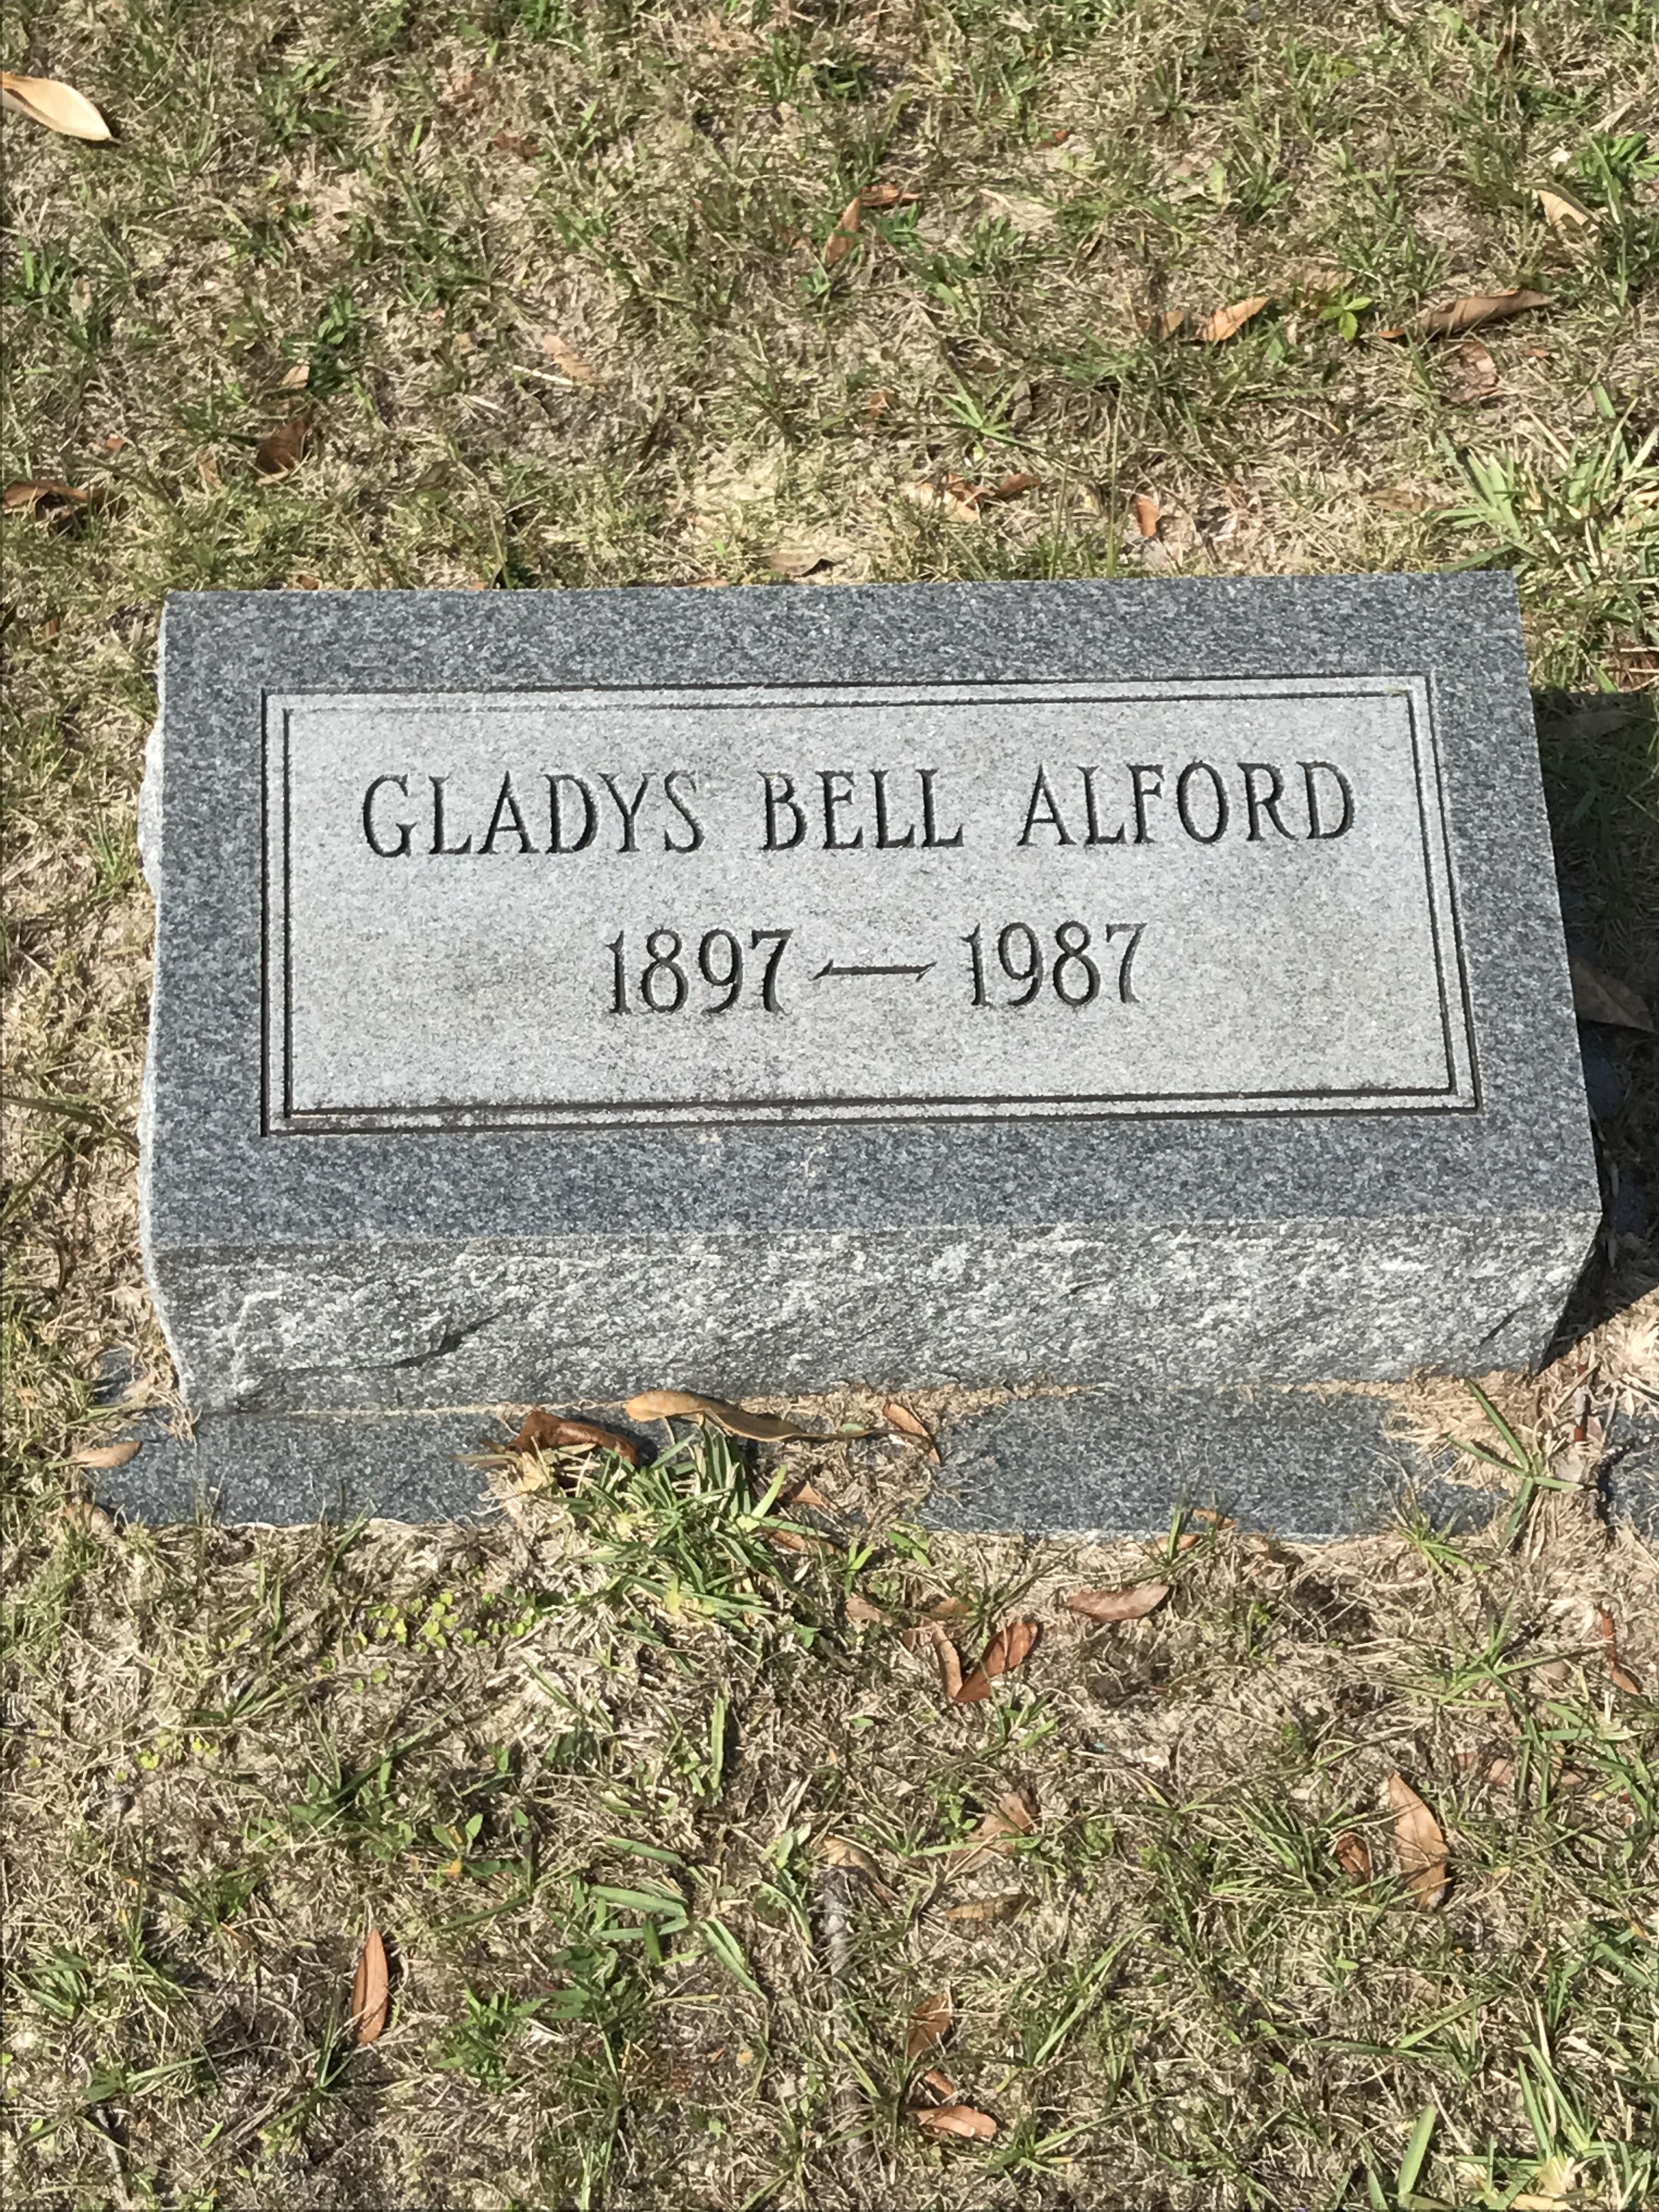 Gladys Bell Alford